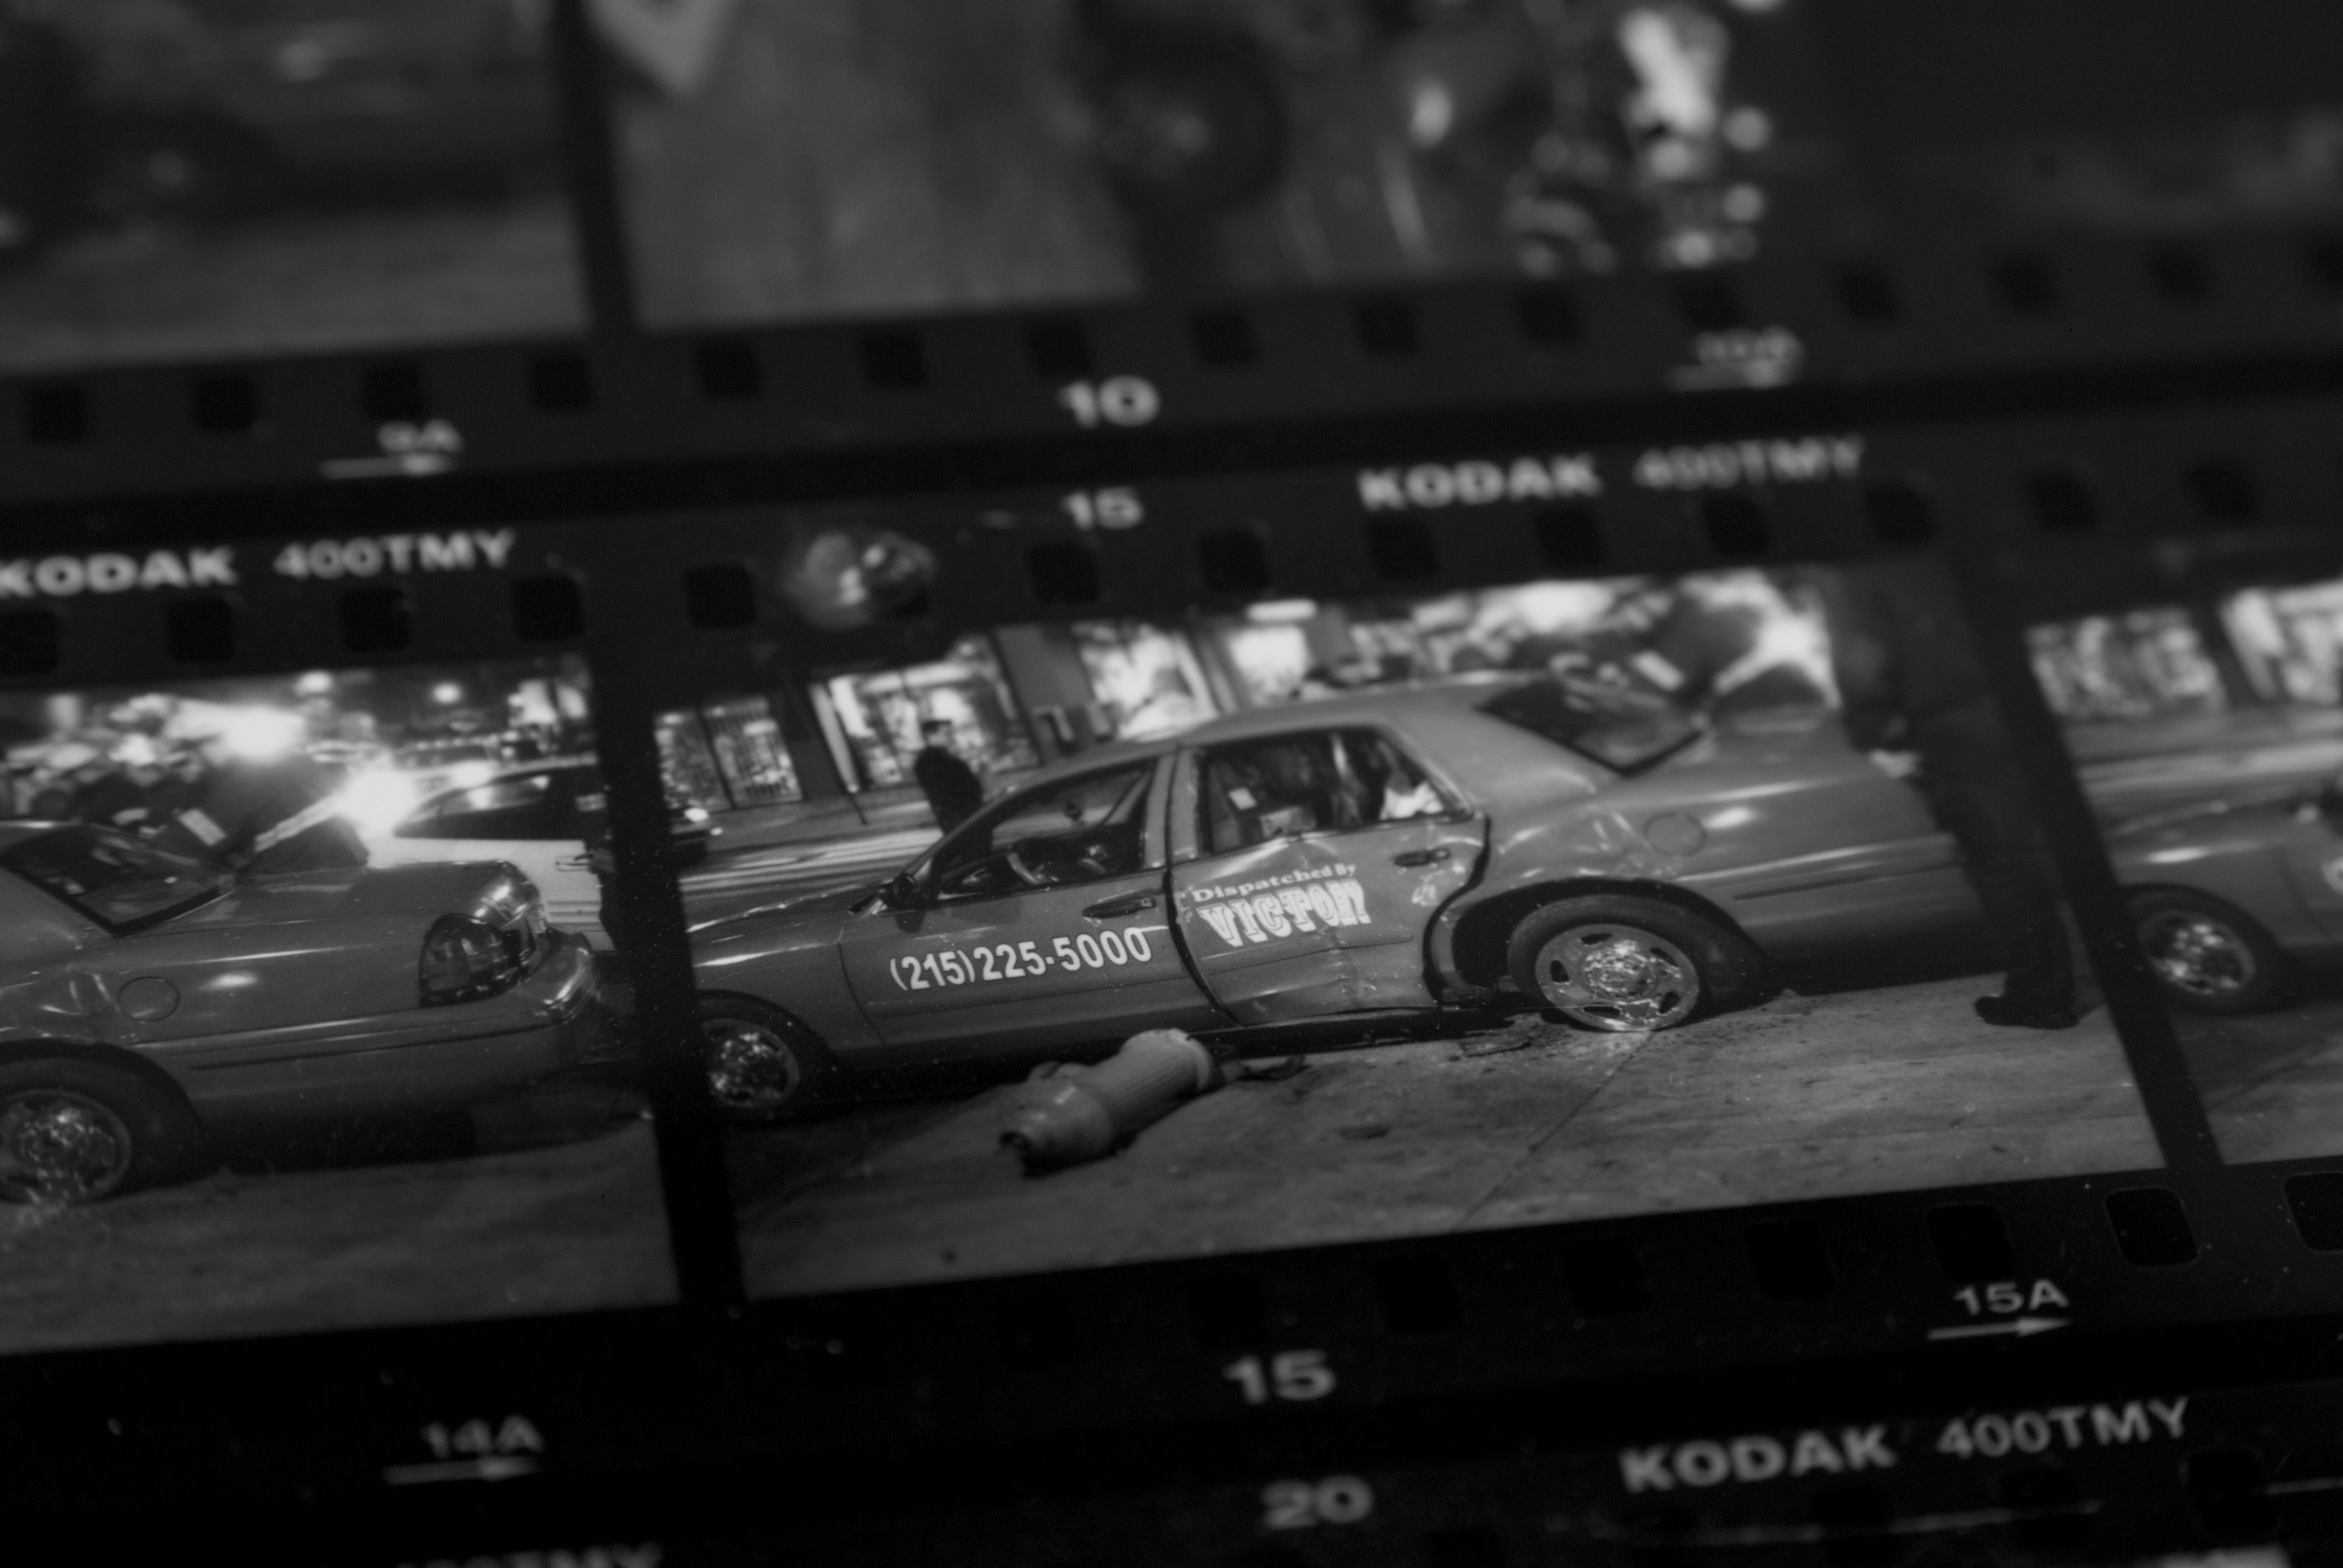 Macro photograph of a contact sheet from film photography. The frame shows a taxi car accident.